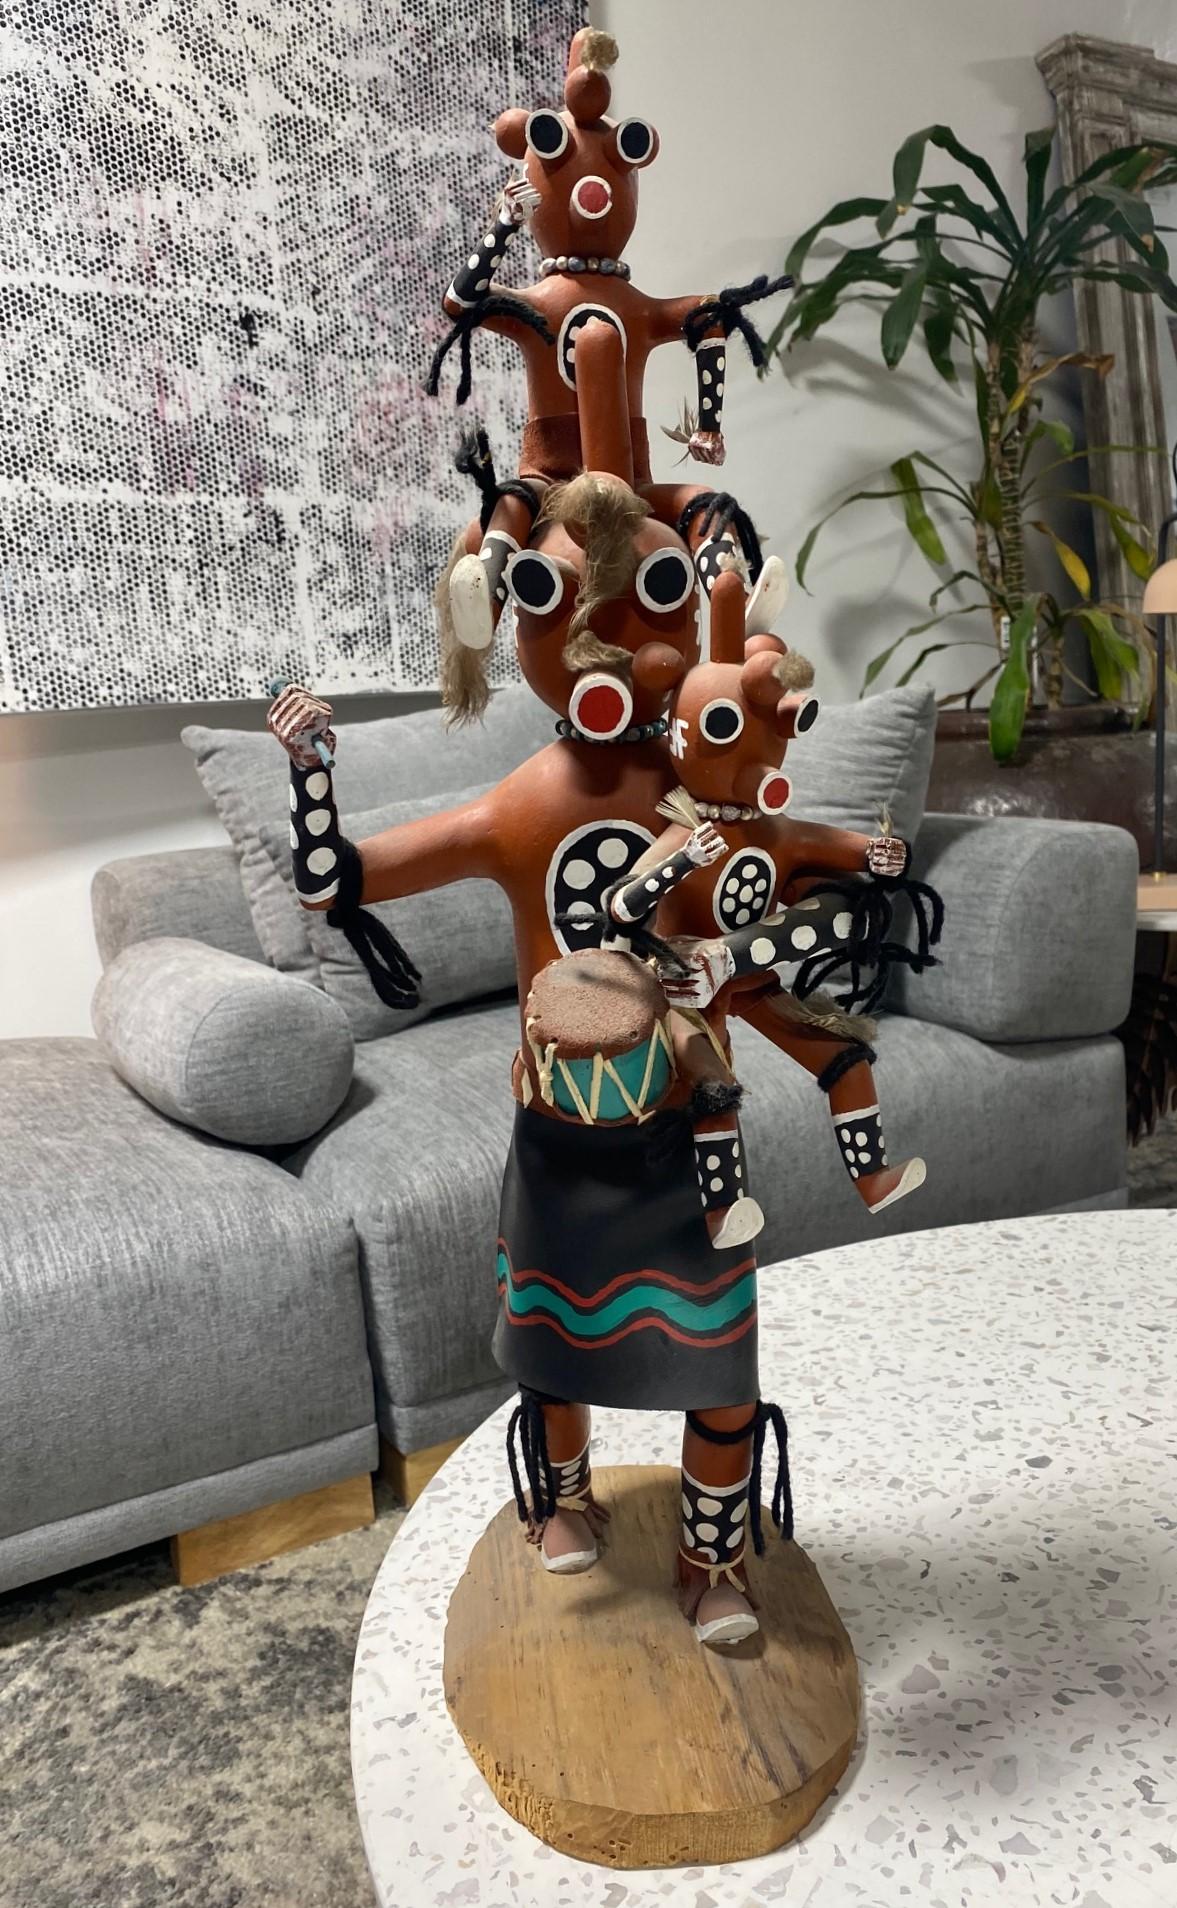 A wonderfully handcrafted/detailed and decorated Native American Hopi Mudhead Kachina doll. Quite an unusually large work. A striking piece overall. Hand painted with leather and possibly turquoise (necklace) accompaniment. 

Hopi katsina figures,